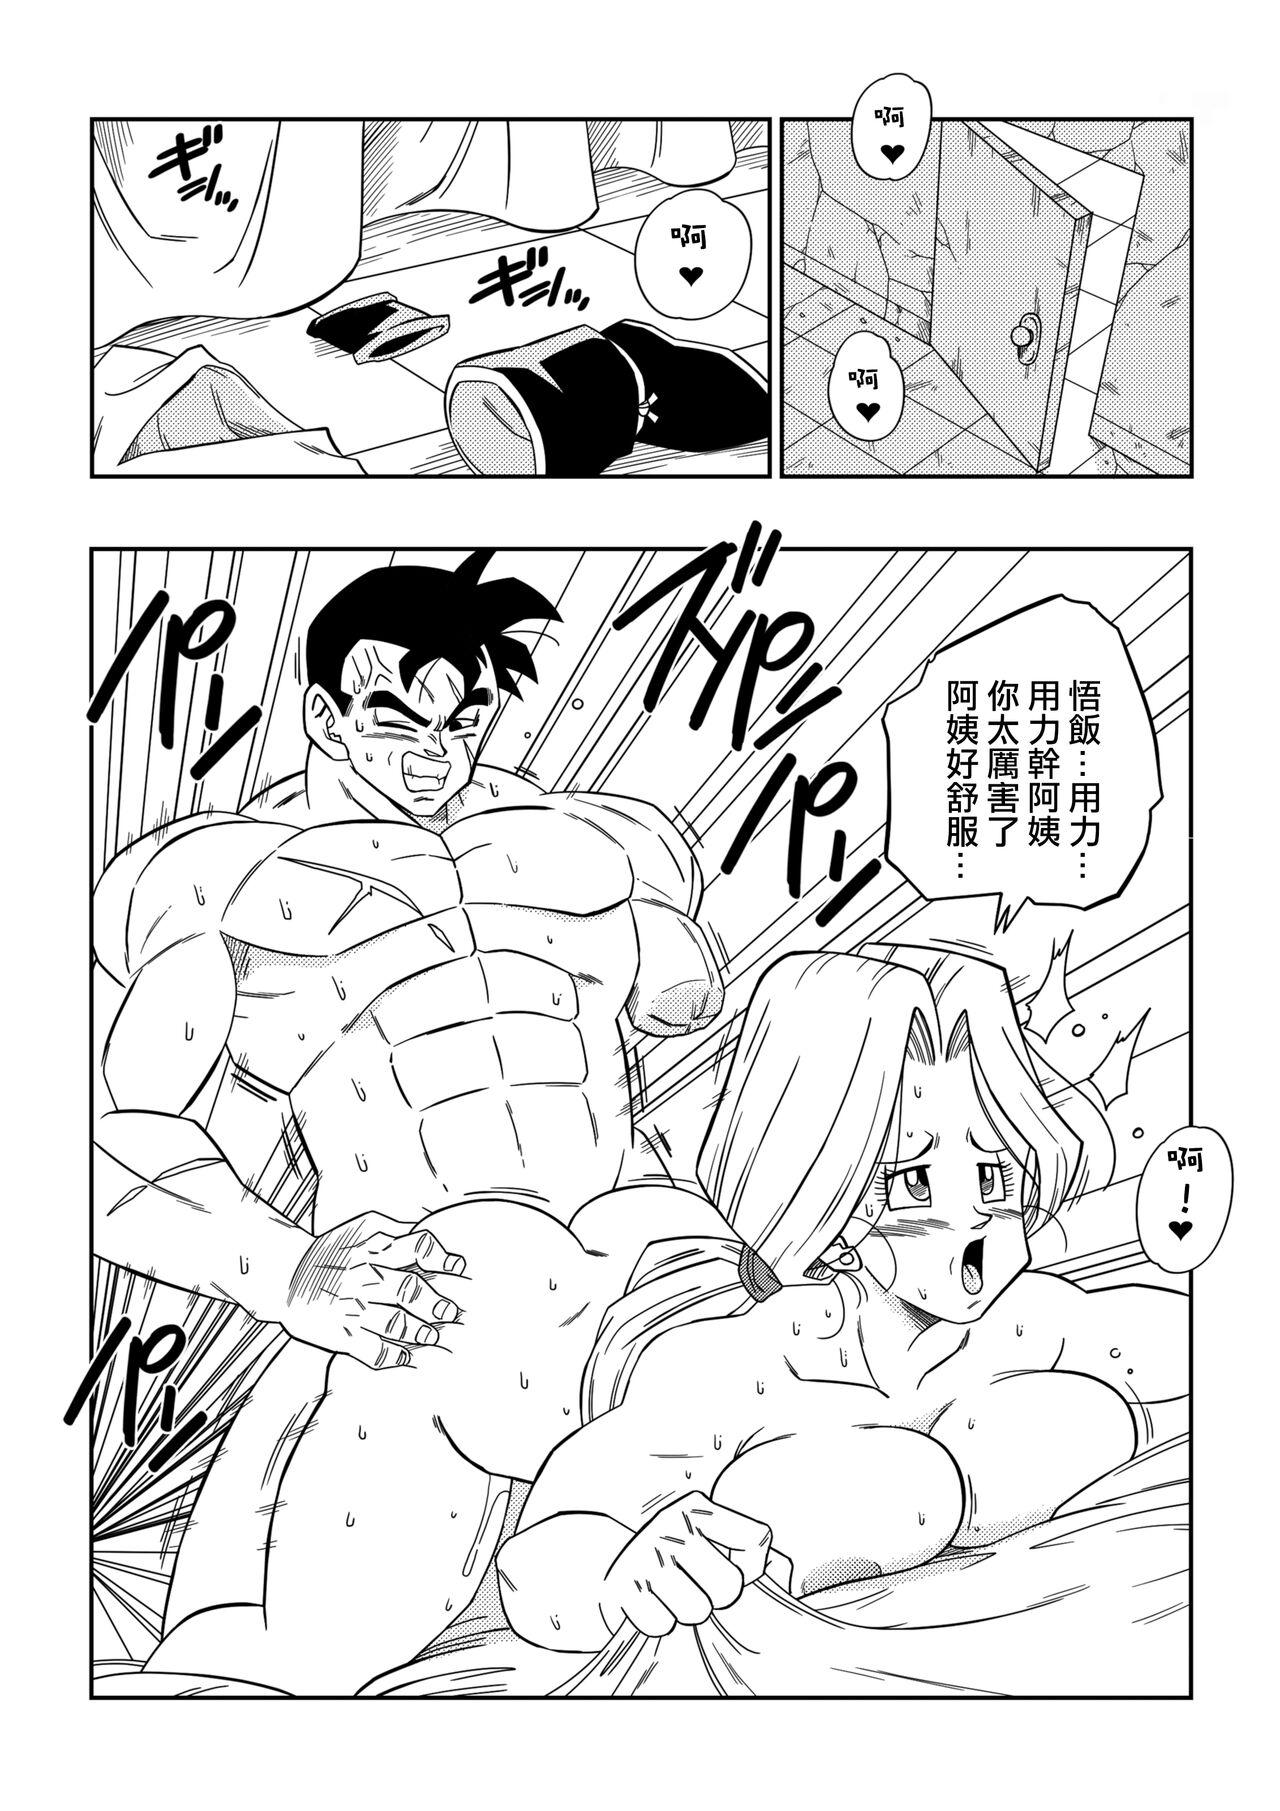 Homemade Lost of sex in this Future! - BULMA and GOHAN - Dragon ball z Best Blowjob - Page 5